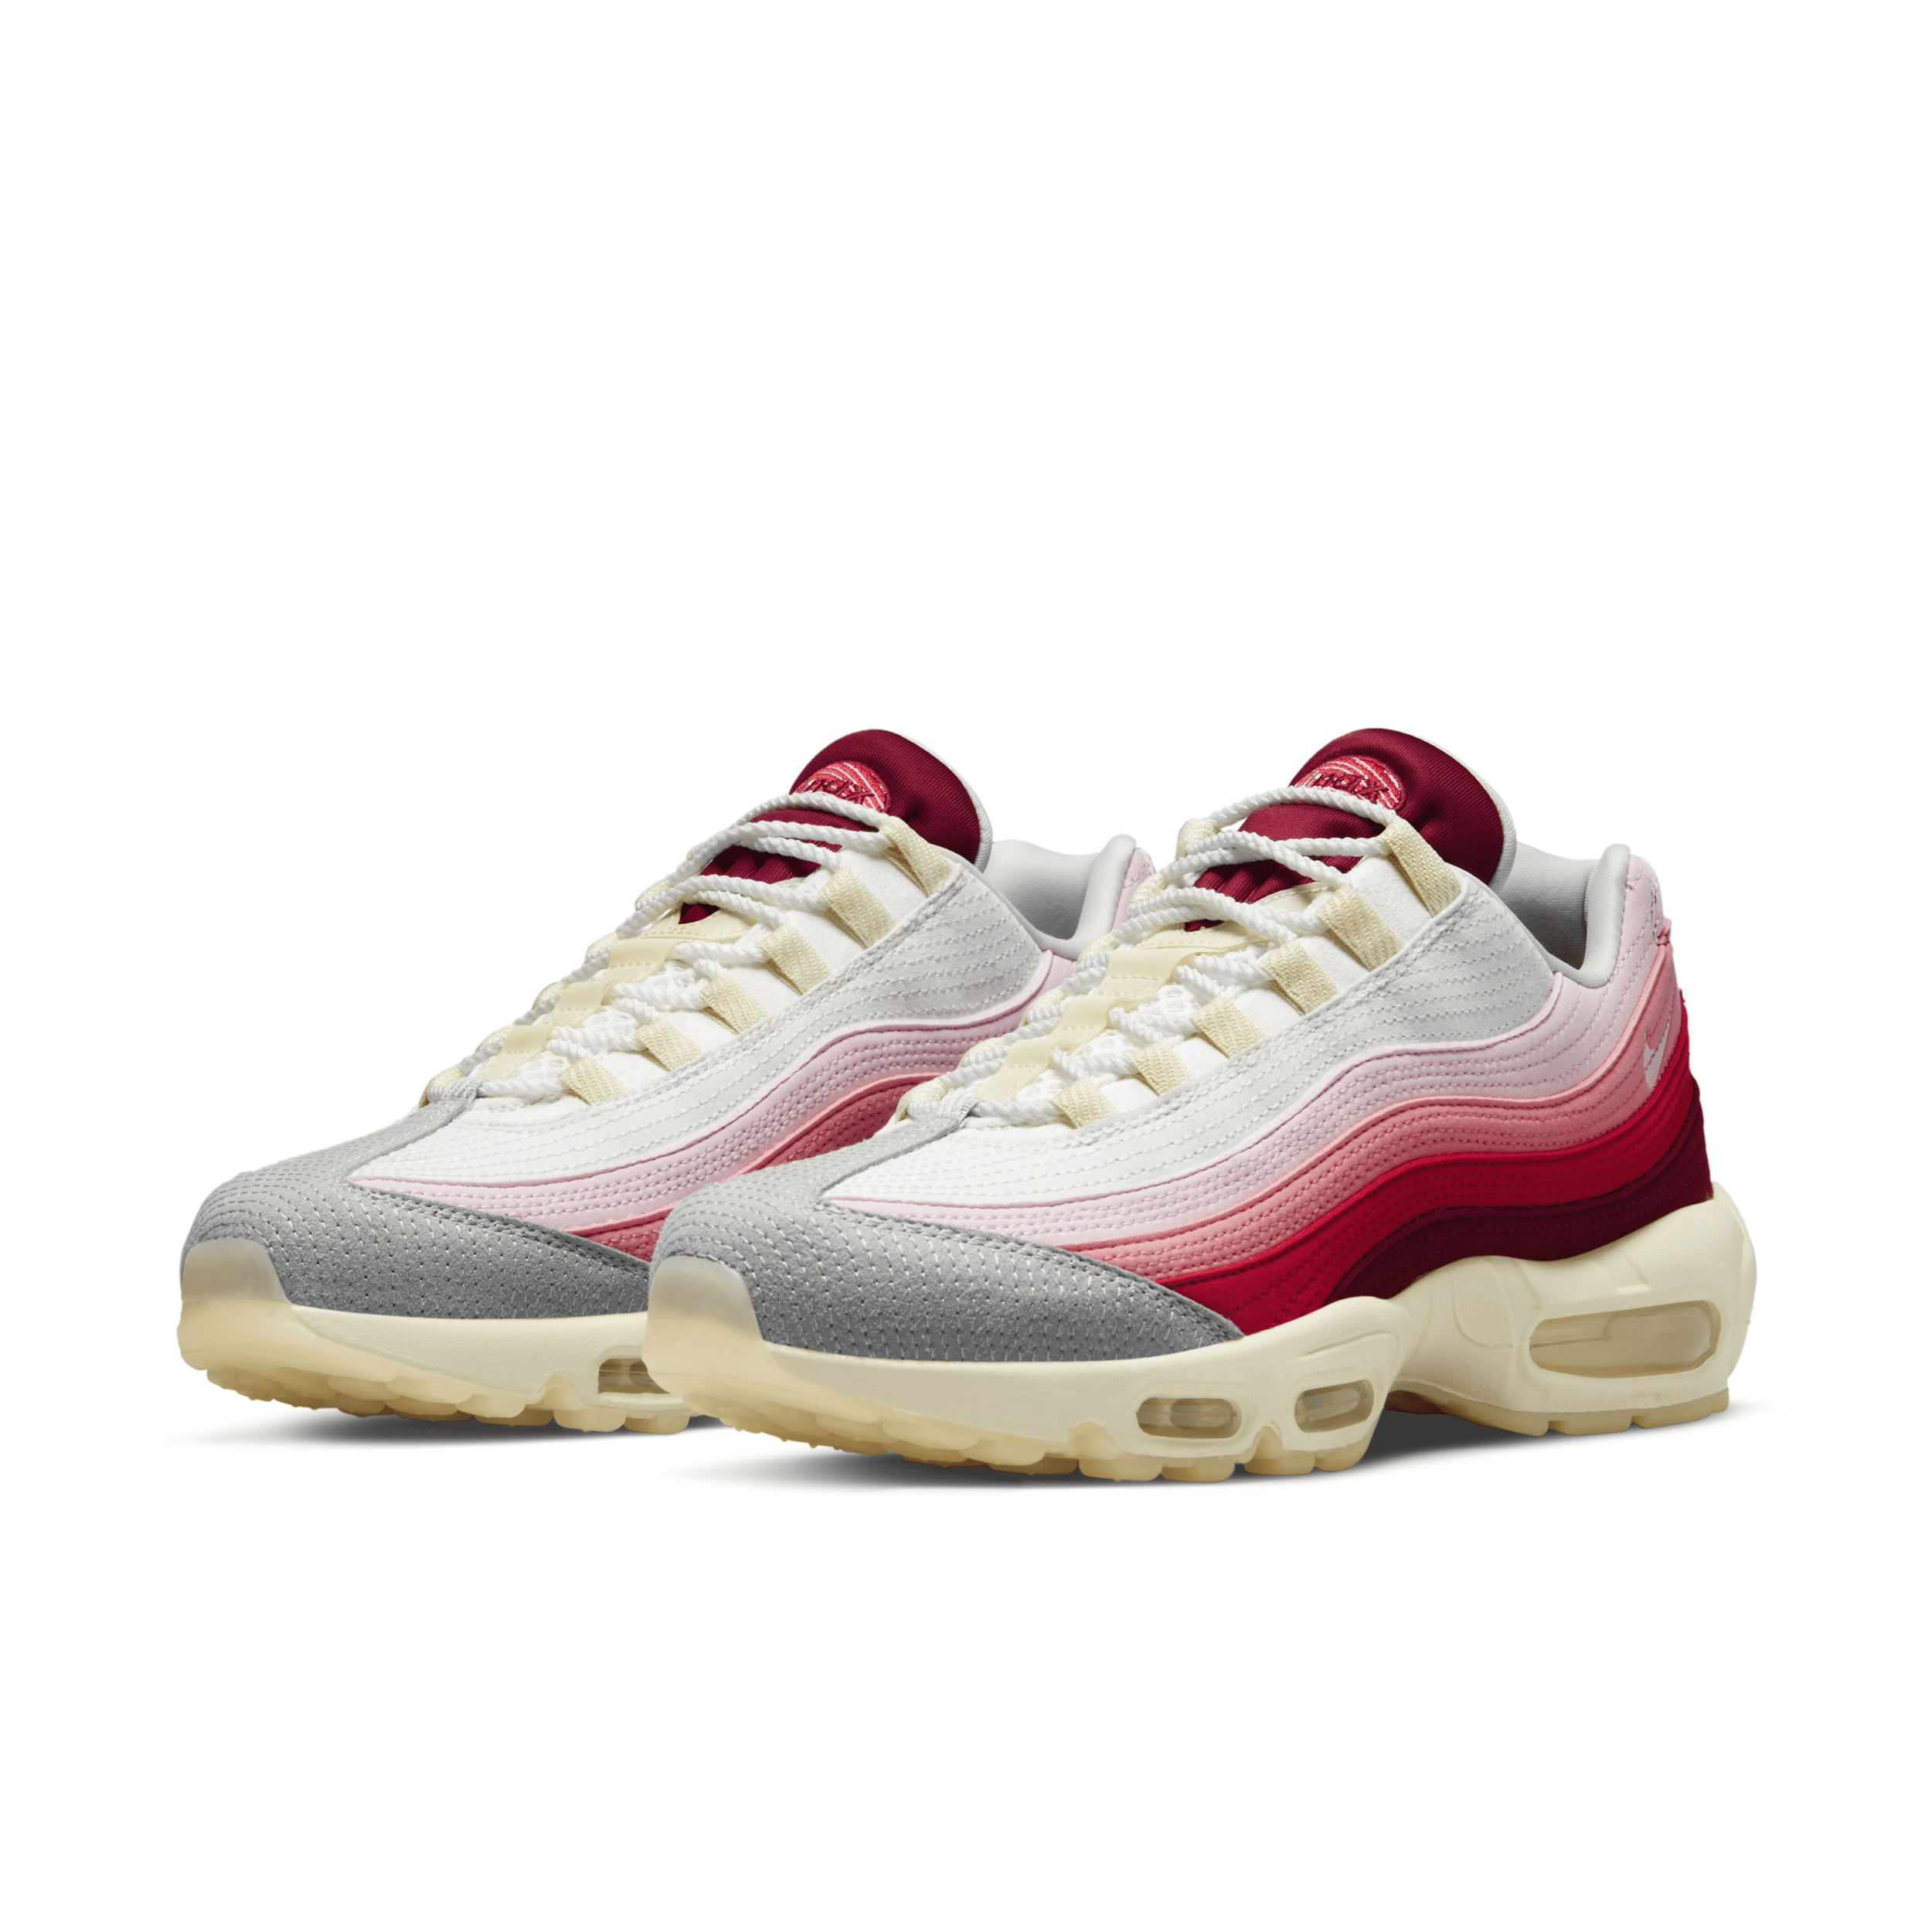 Nike Men's Air Max 95 Shoes (Red/Chalk/White) $80.23 & More + Free Shipping